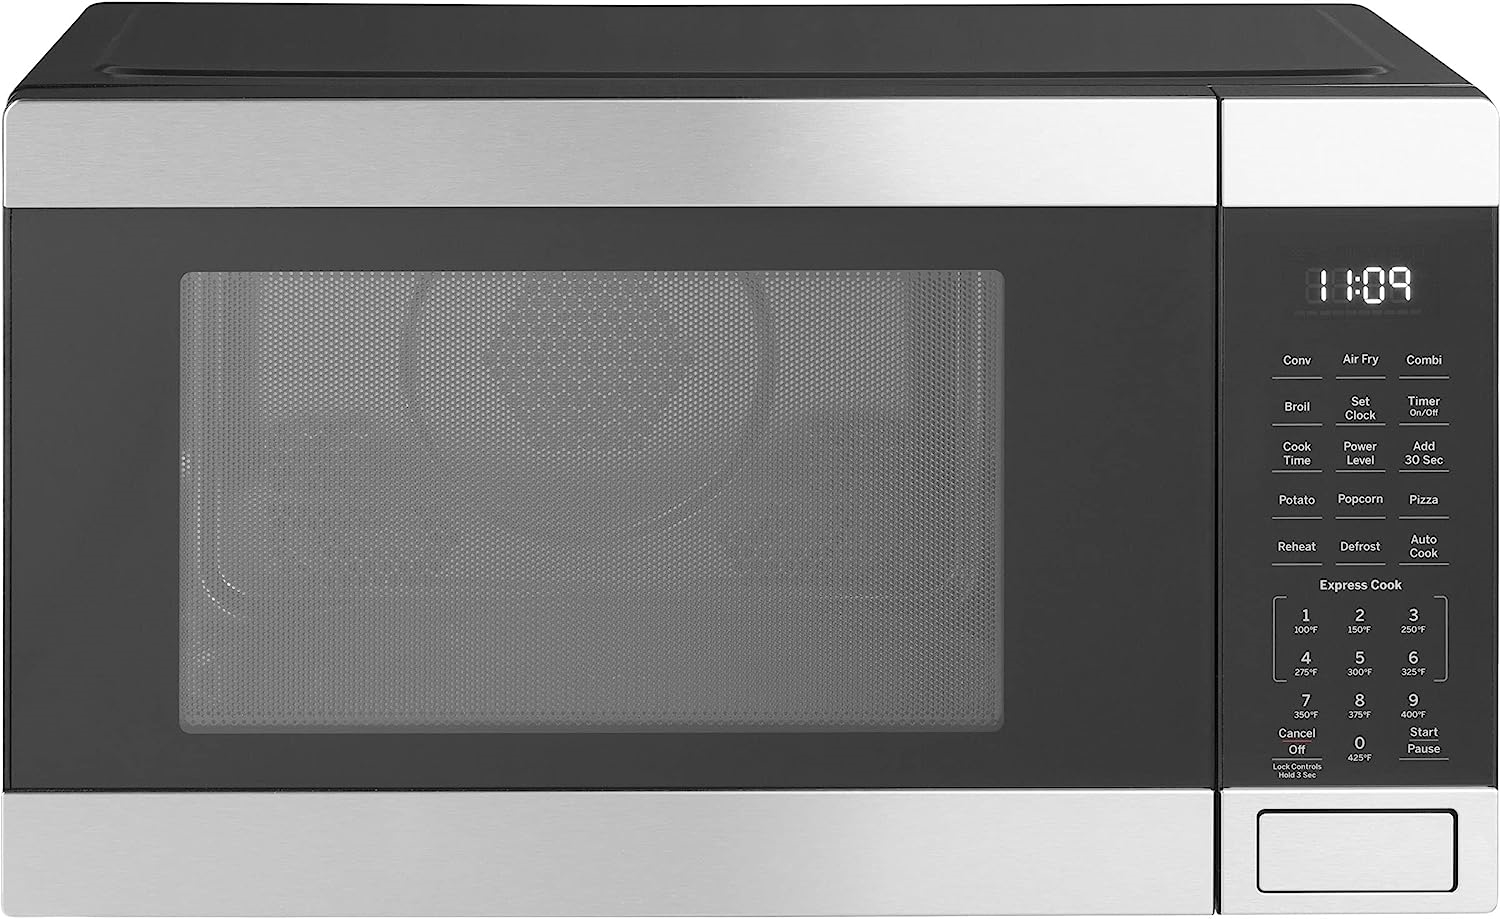 GE Microwave Toaster Oven | DeviceDaily.com